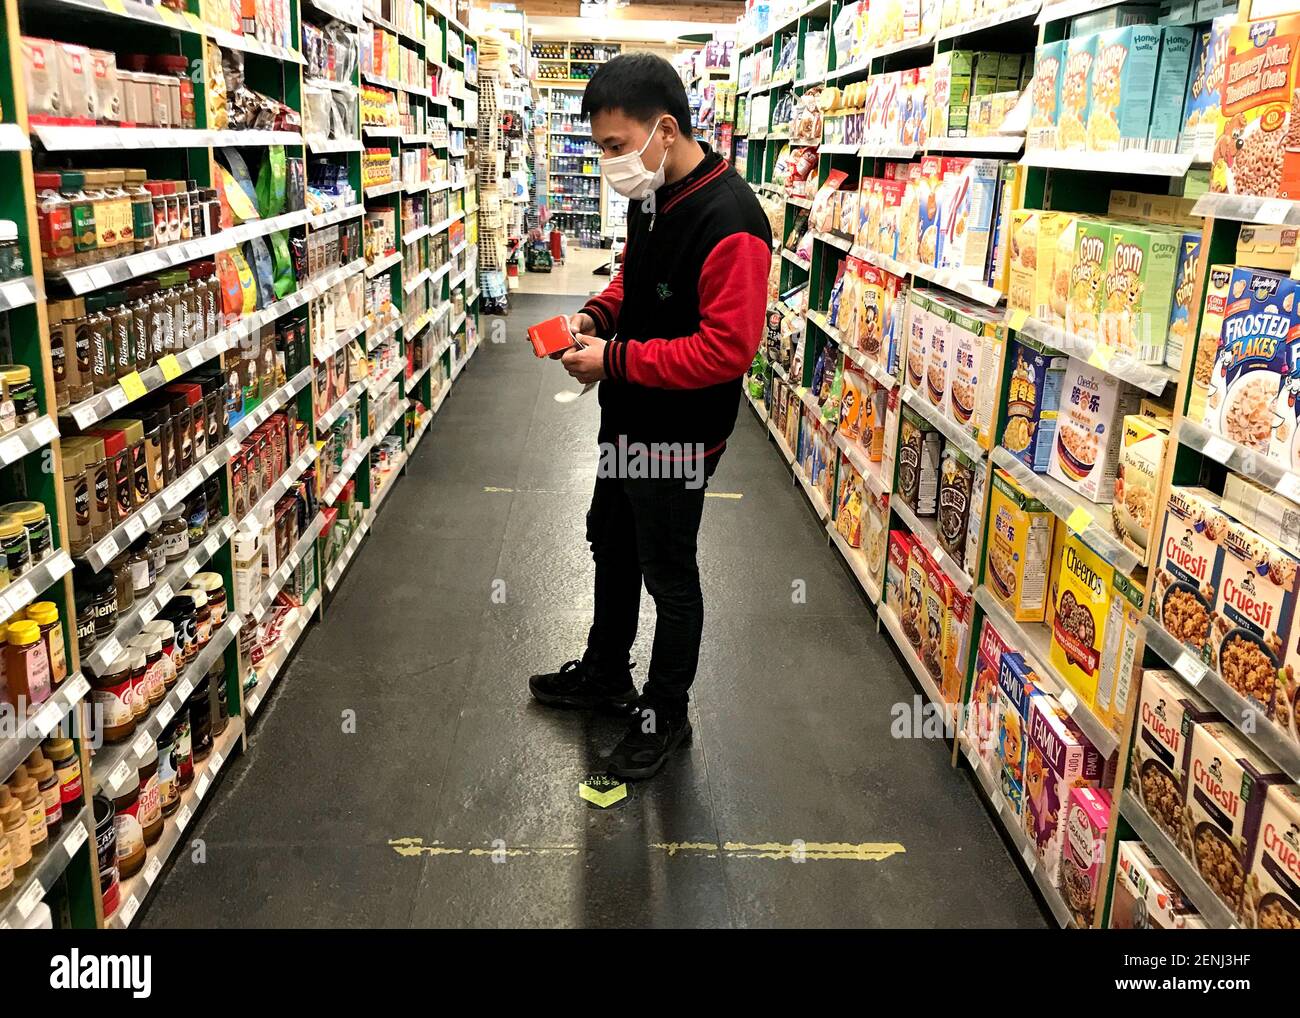 Beijing, China. 26th Feb, 2021. Chinese store clerks stock shelves with imported food items at an upscale 'Western' supermarket in downtown Beijing on Friday, February 26, 2021. China is placing greater emphasis on food security and self-reliance to feed its 1.4 billion people, according to its annual blueprint for rural policies amid the pandemic. Photo by Stephen Shaver/UPI Credit: UPI/Alamy Live News Stock Photo